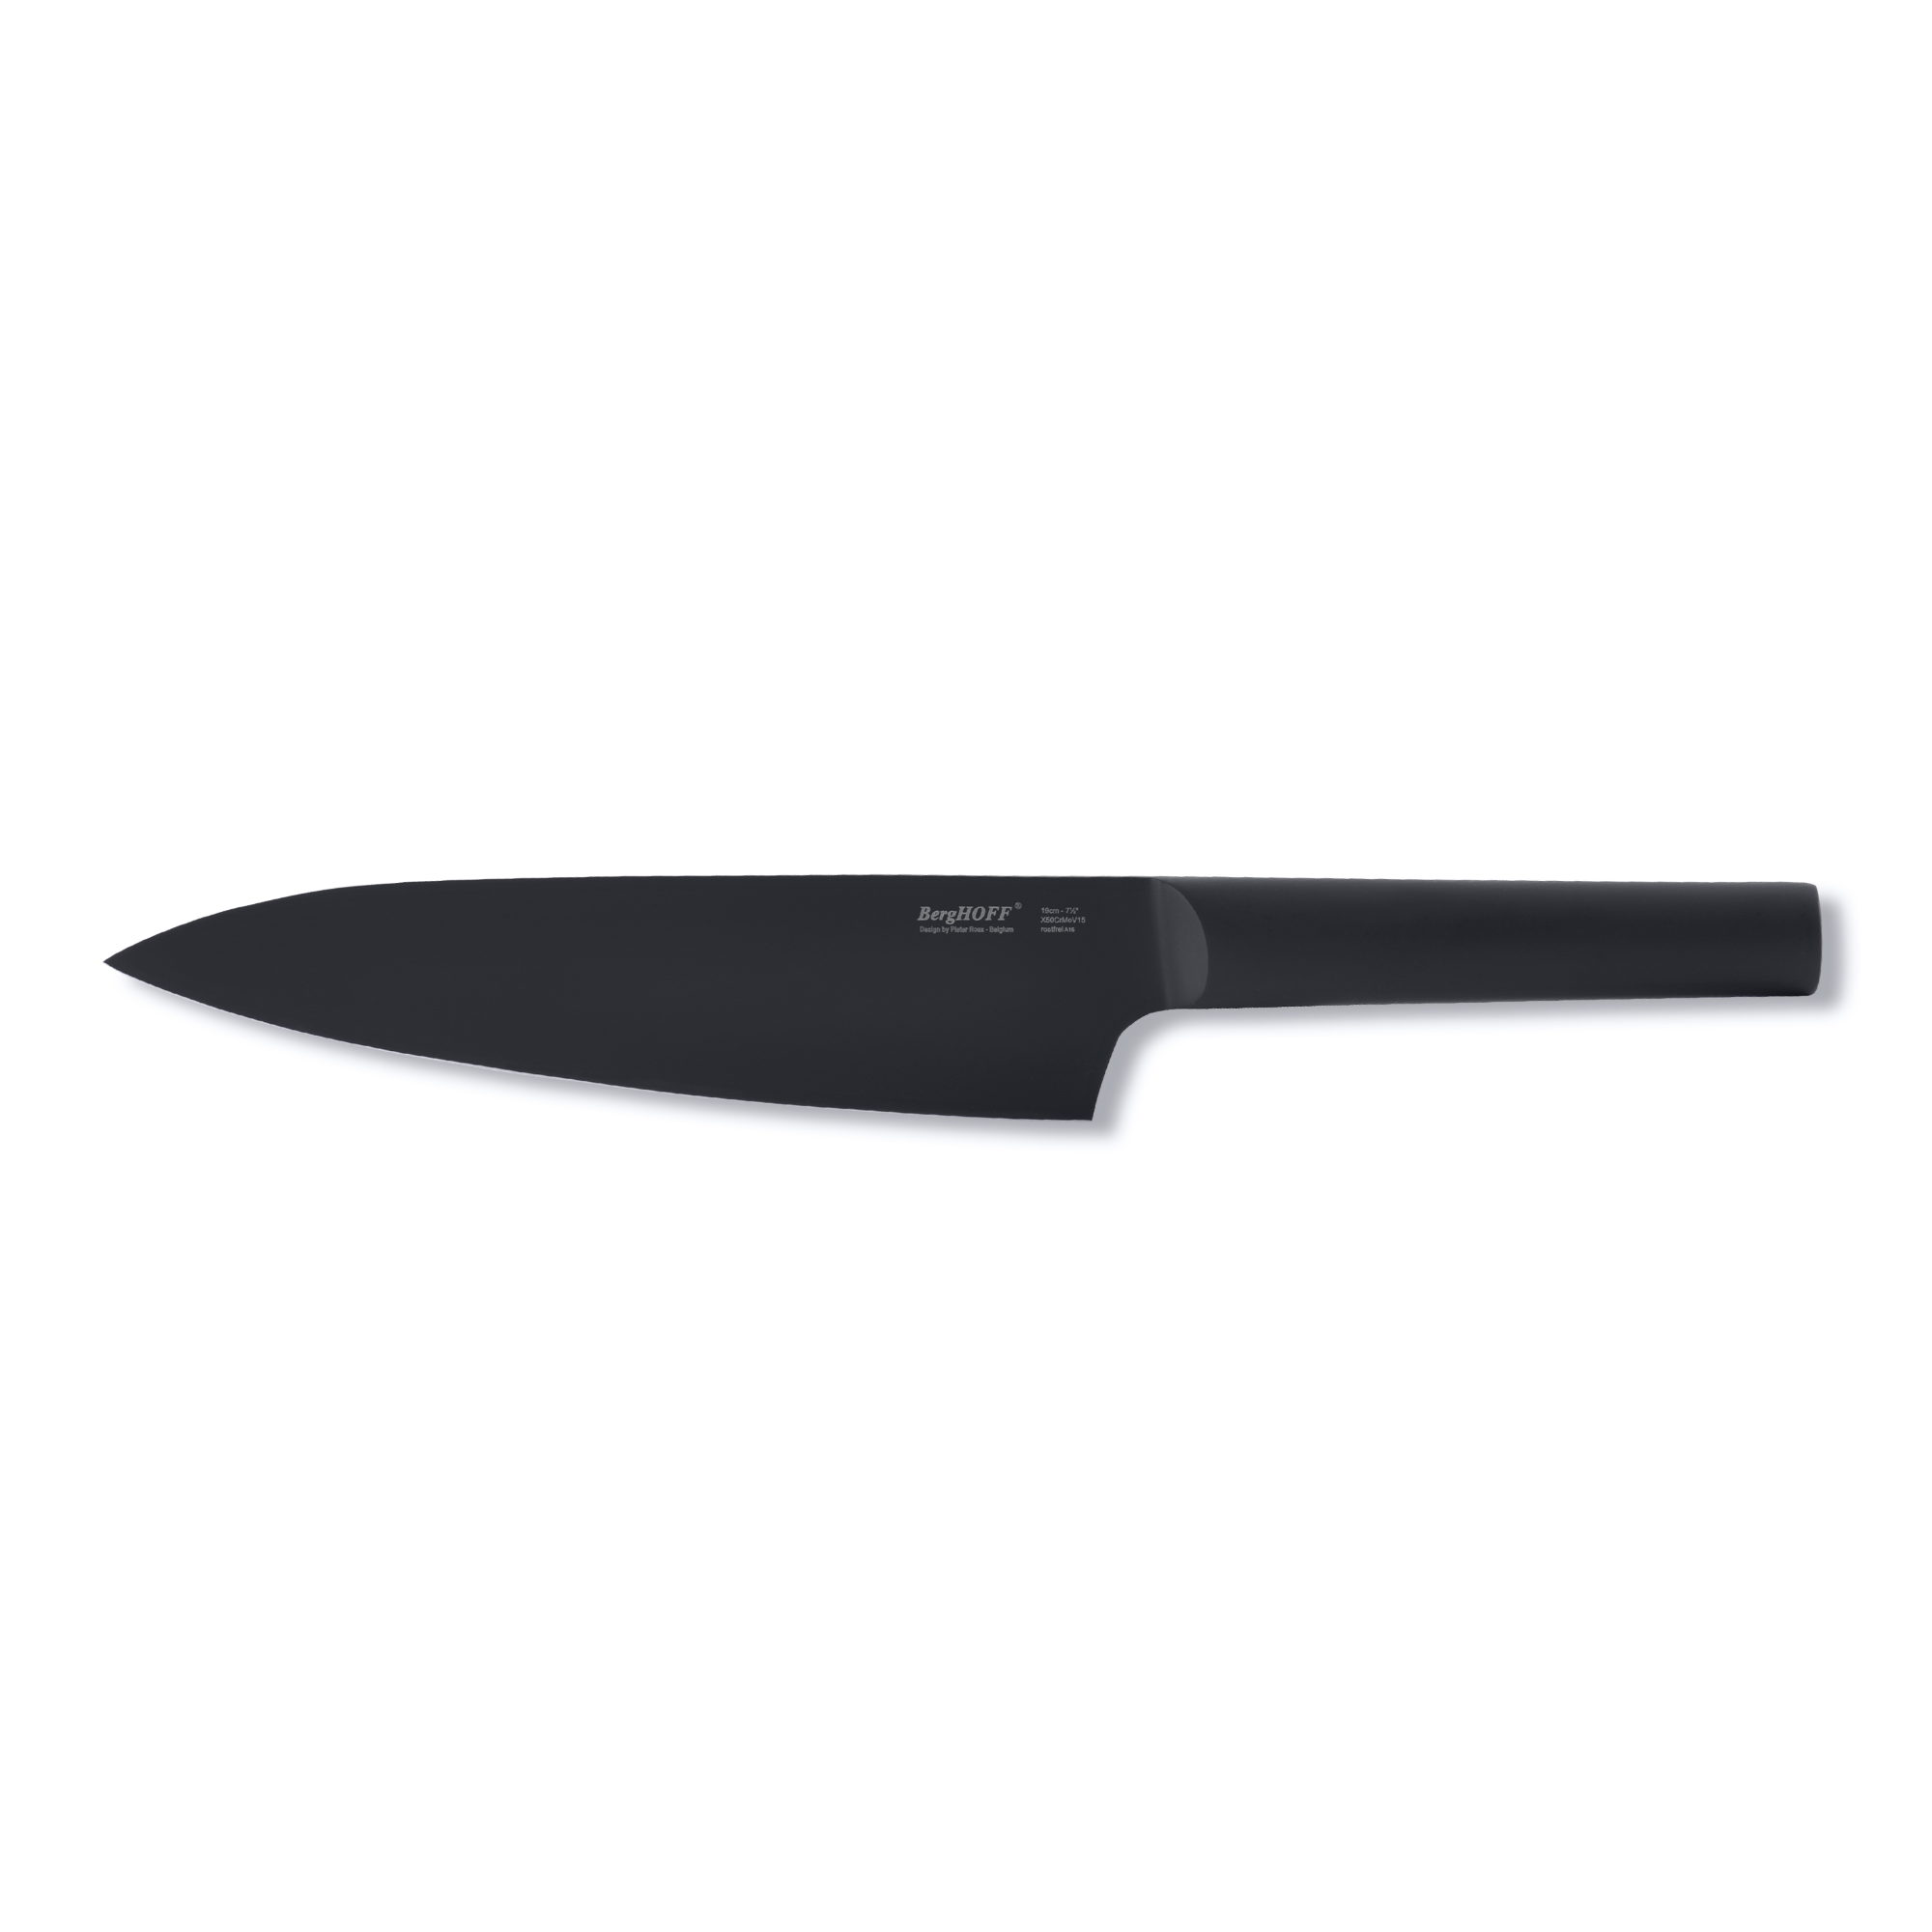 Chef's knife black 19 cm - Ron | Official BergHOFF website